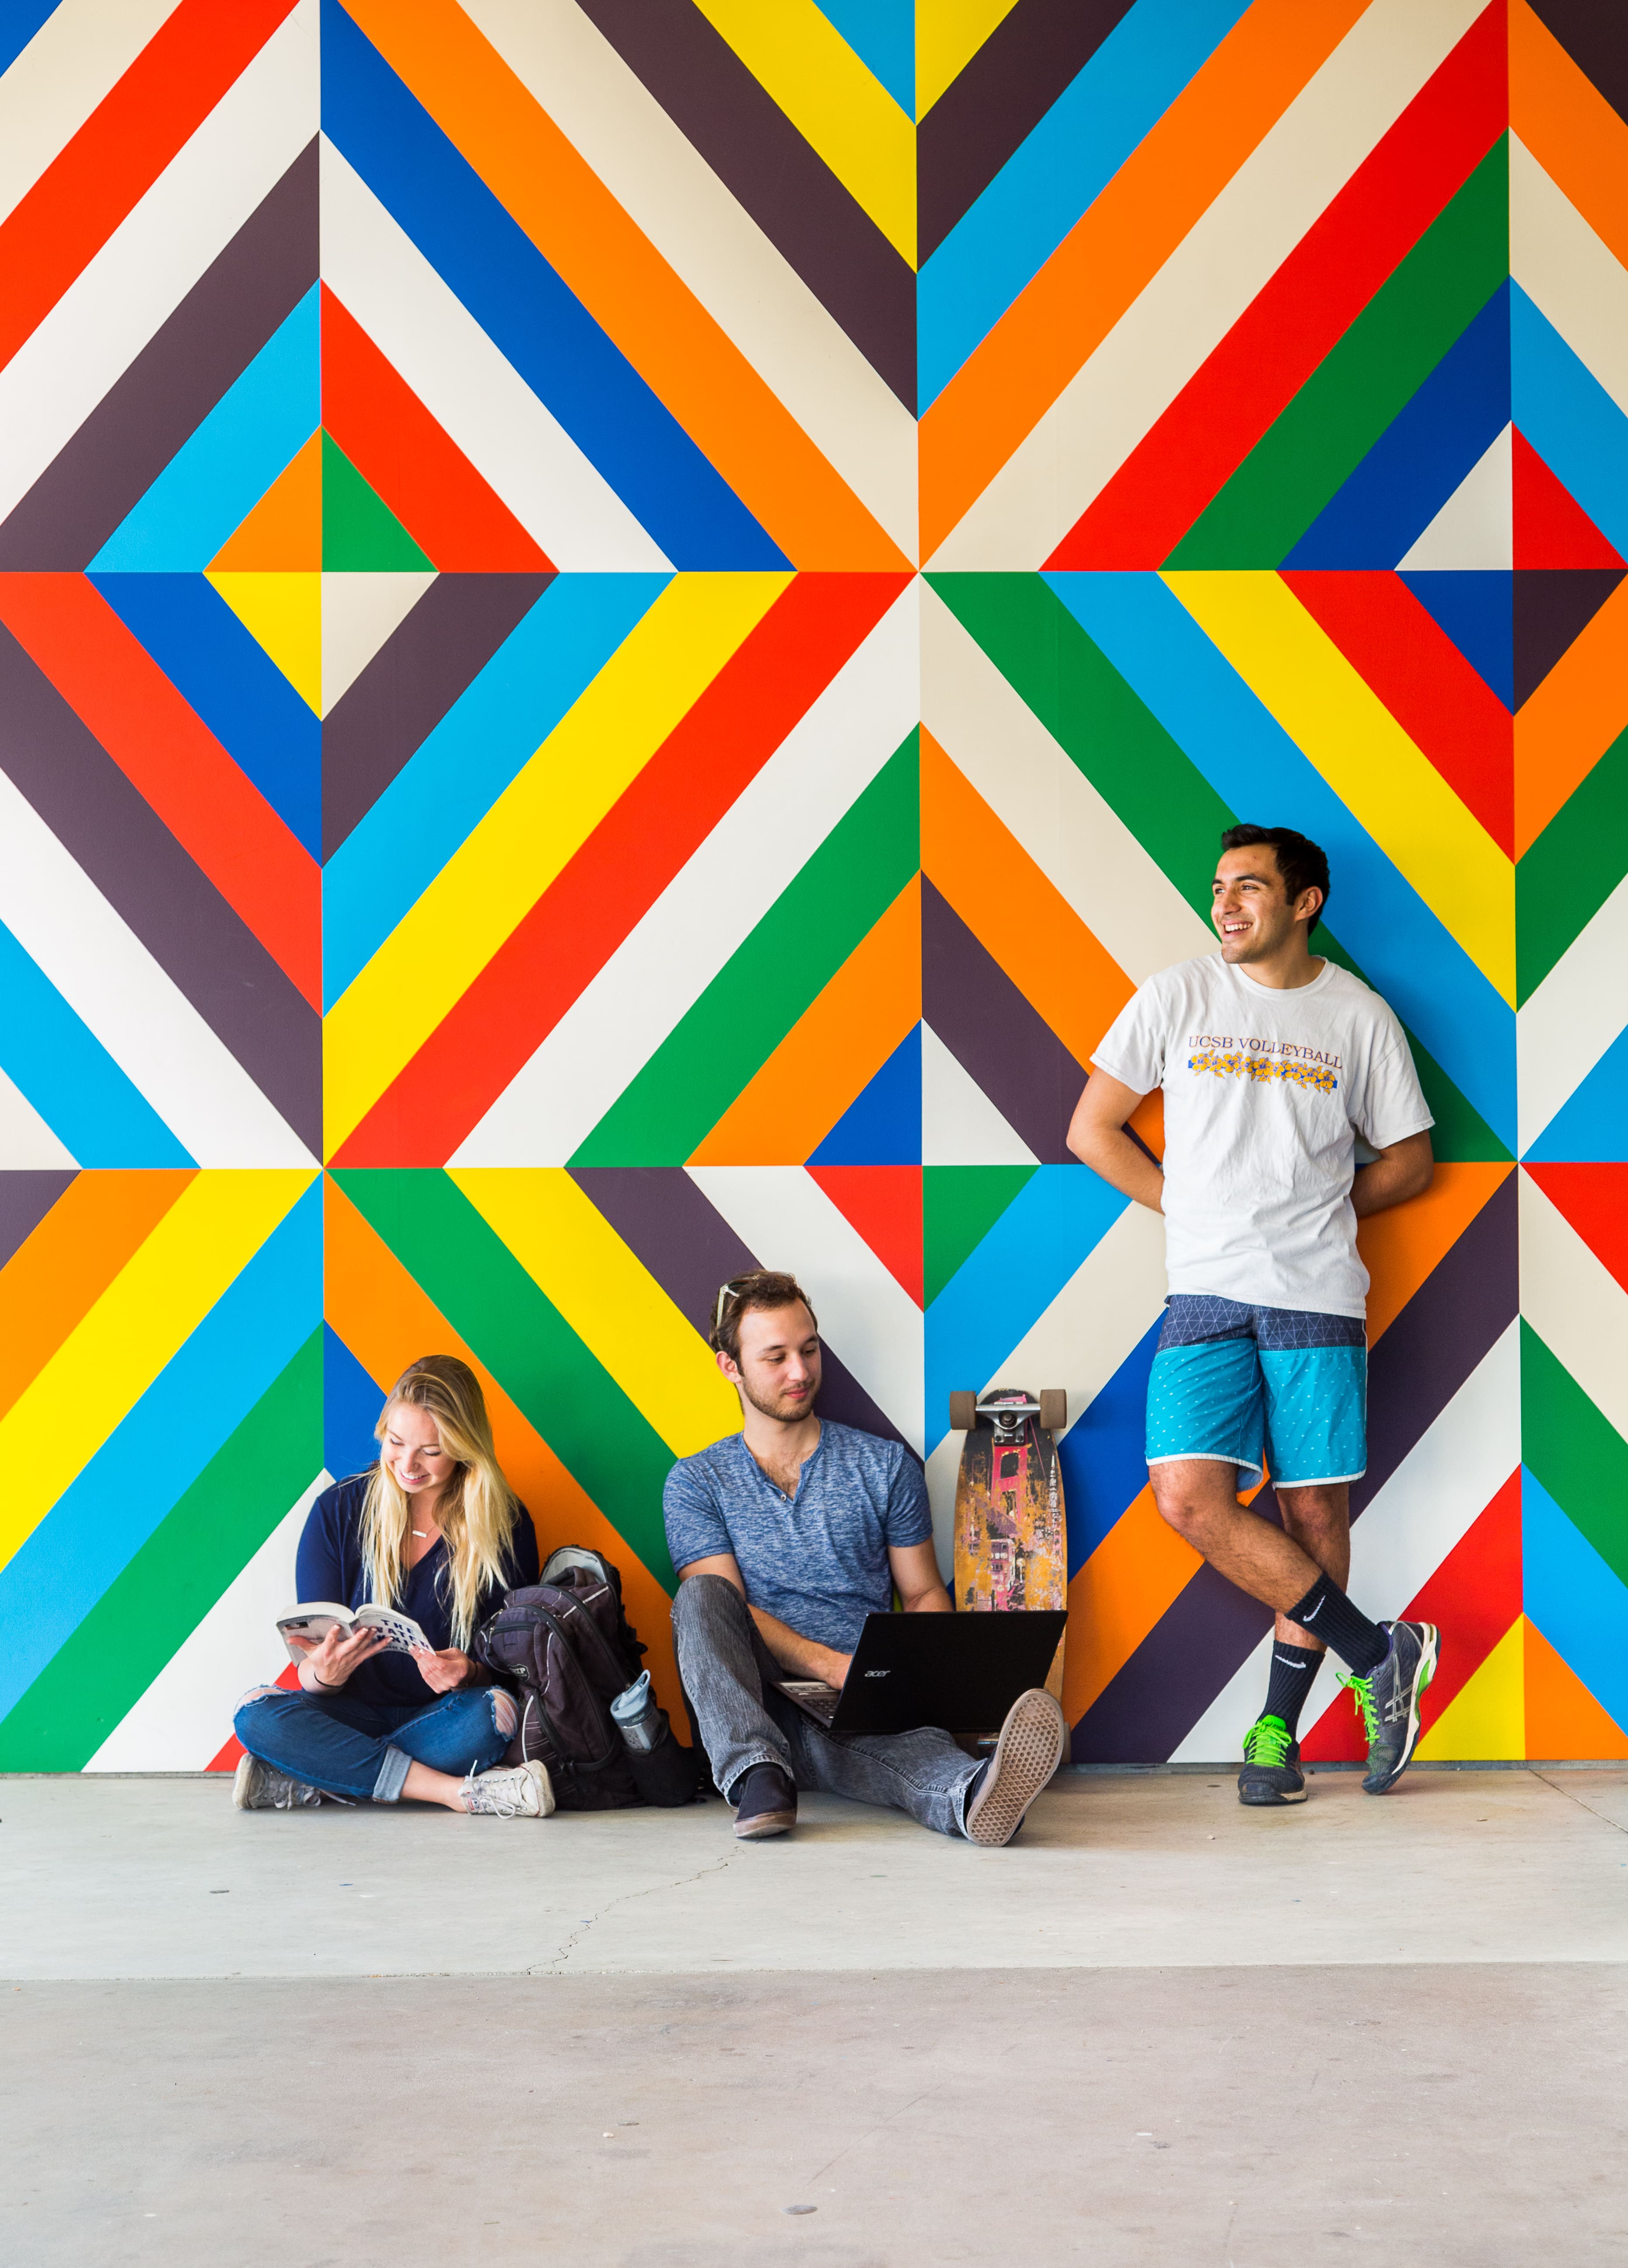 Three Students sitting and standing in front of a geometric, colorful wall.